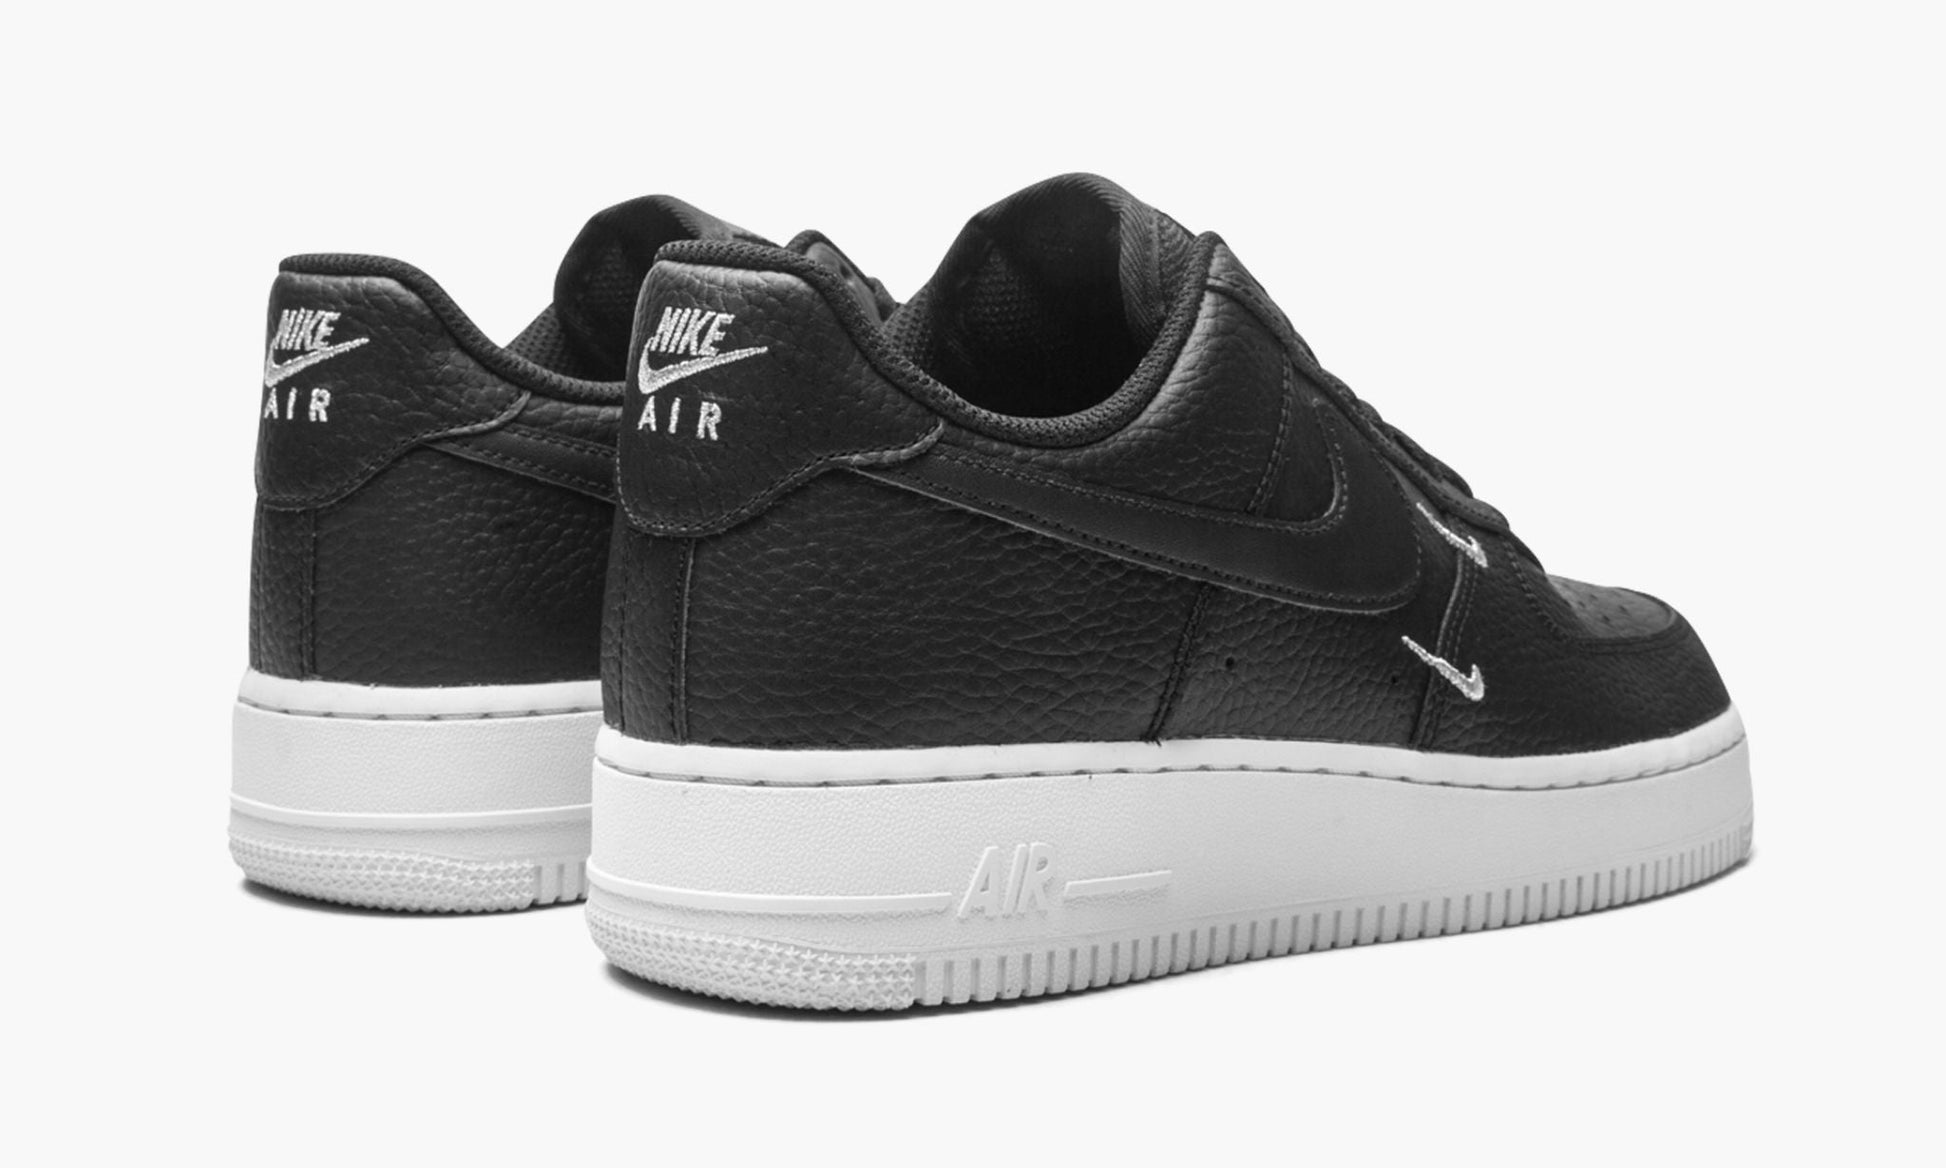 WMNS Air Force 1 '07 ESS "Tumbled Leather"